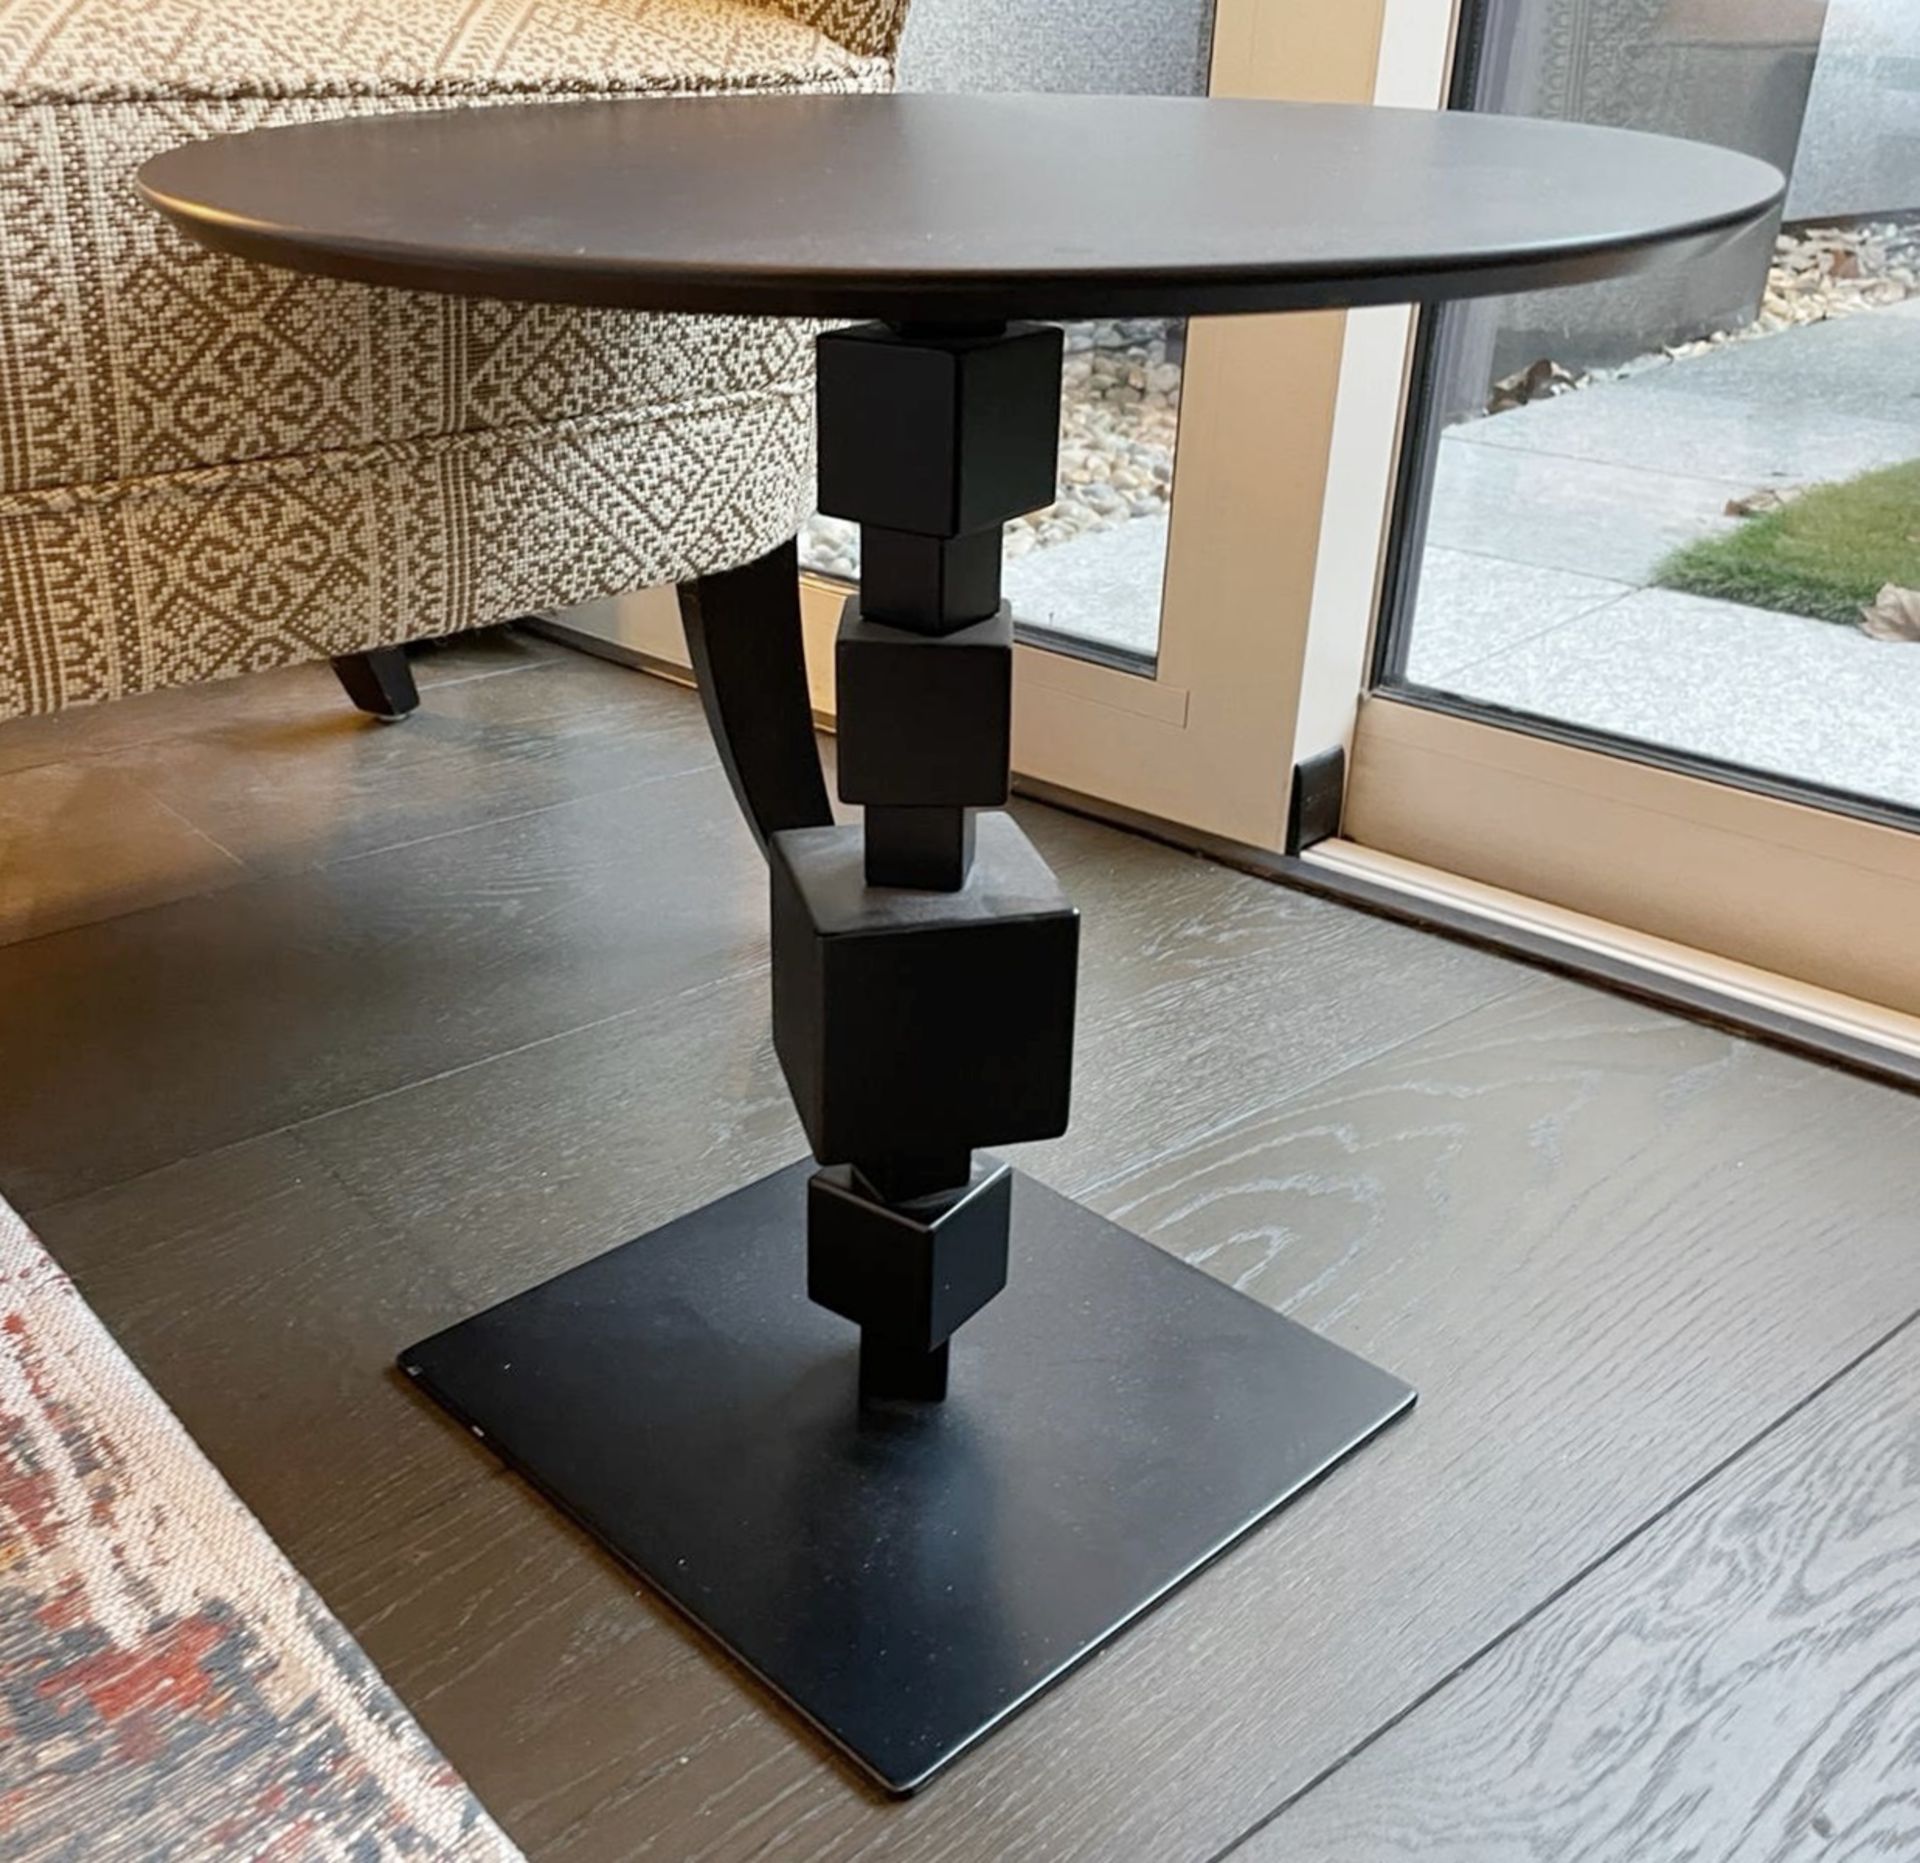 1 x NOLITA Occasional Side Table with a Cubed Metal Base, Bronzed Finish and Industrial - Image 6 of 9